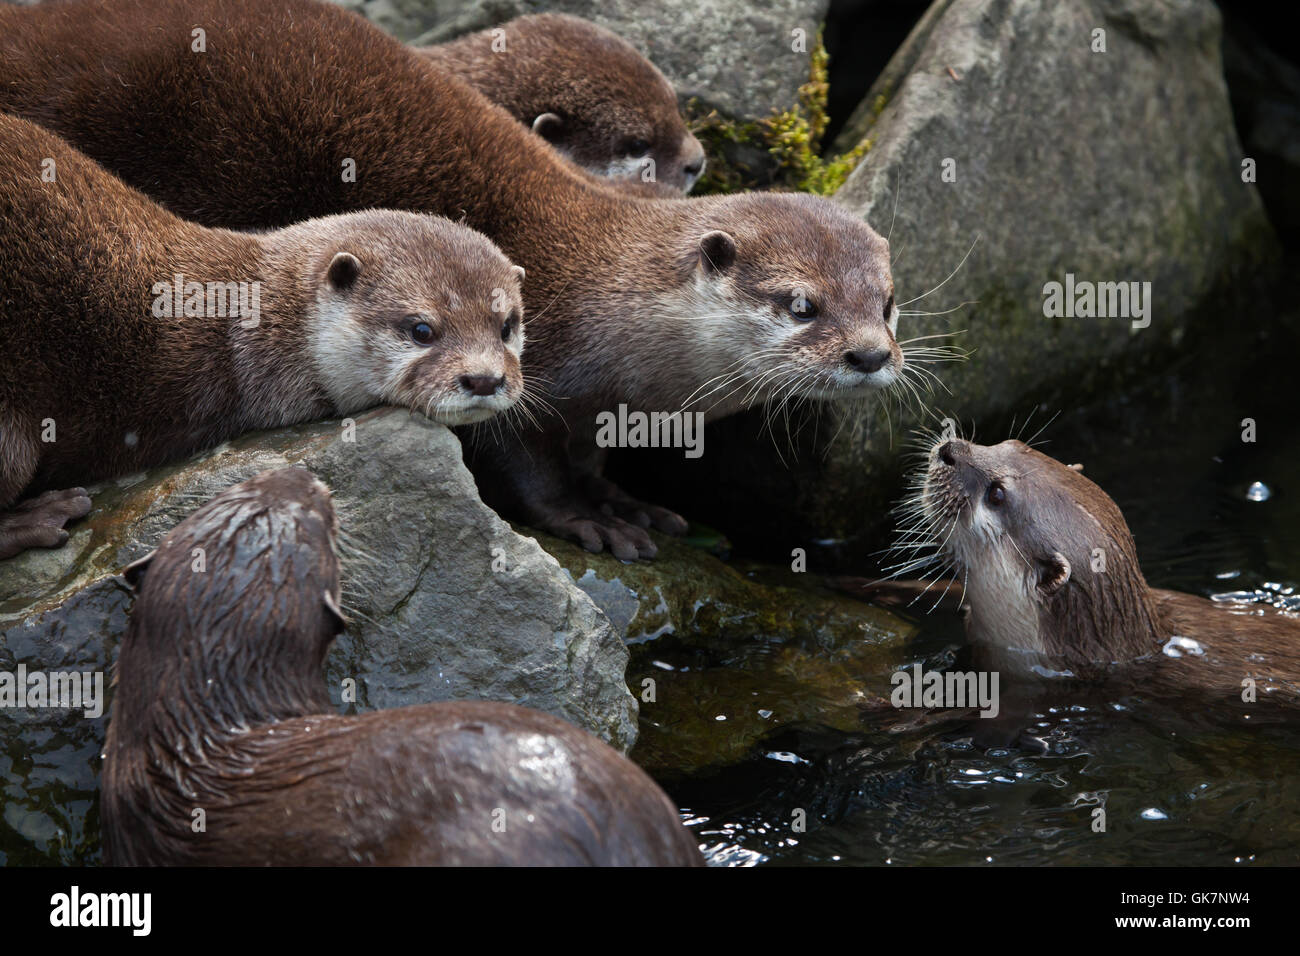 Oriental small-clawed otter (Amblonyx cinerea), also known as the Asian small-clawed otter. Wildlife animal. Stock Photo